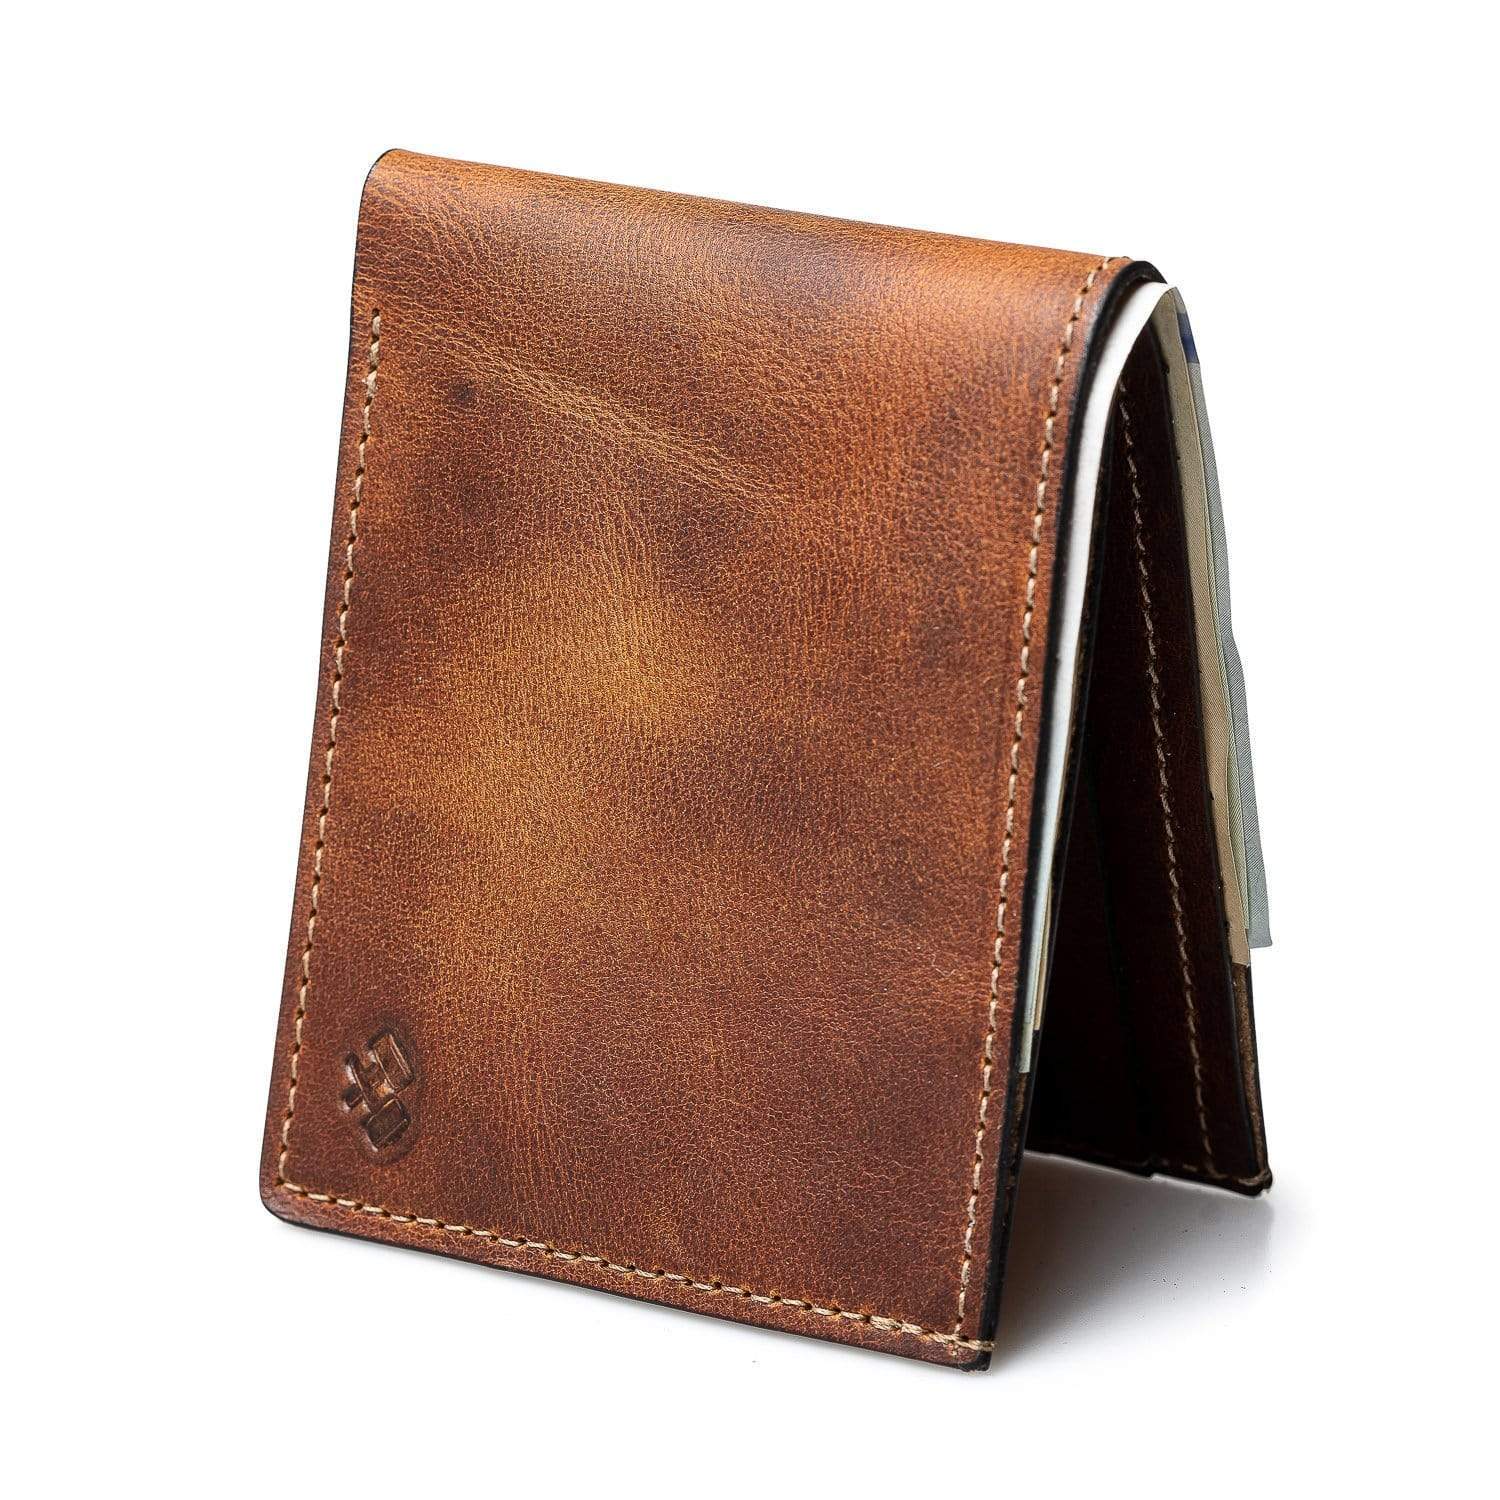 Main Street Forge - Full Grain Leather Wallets